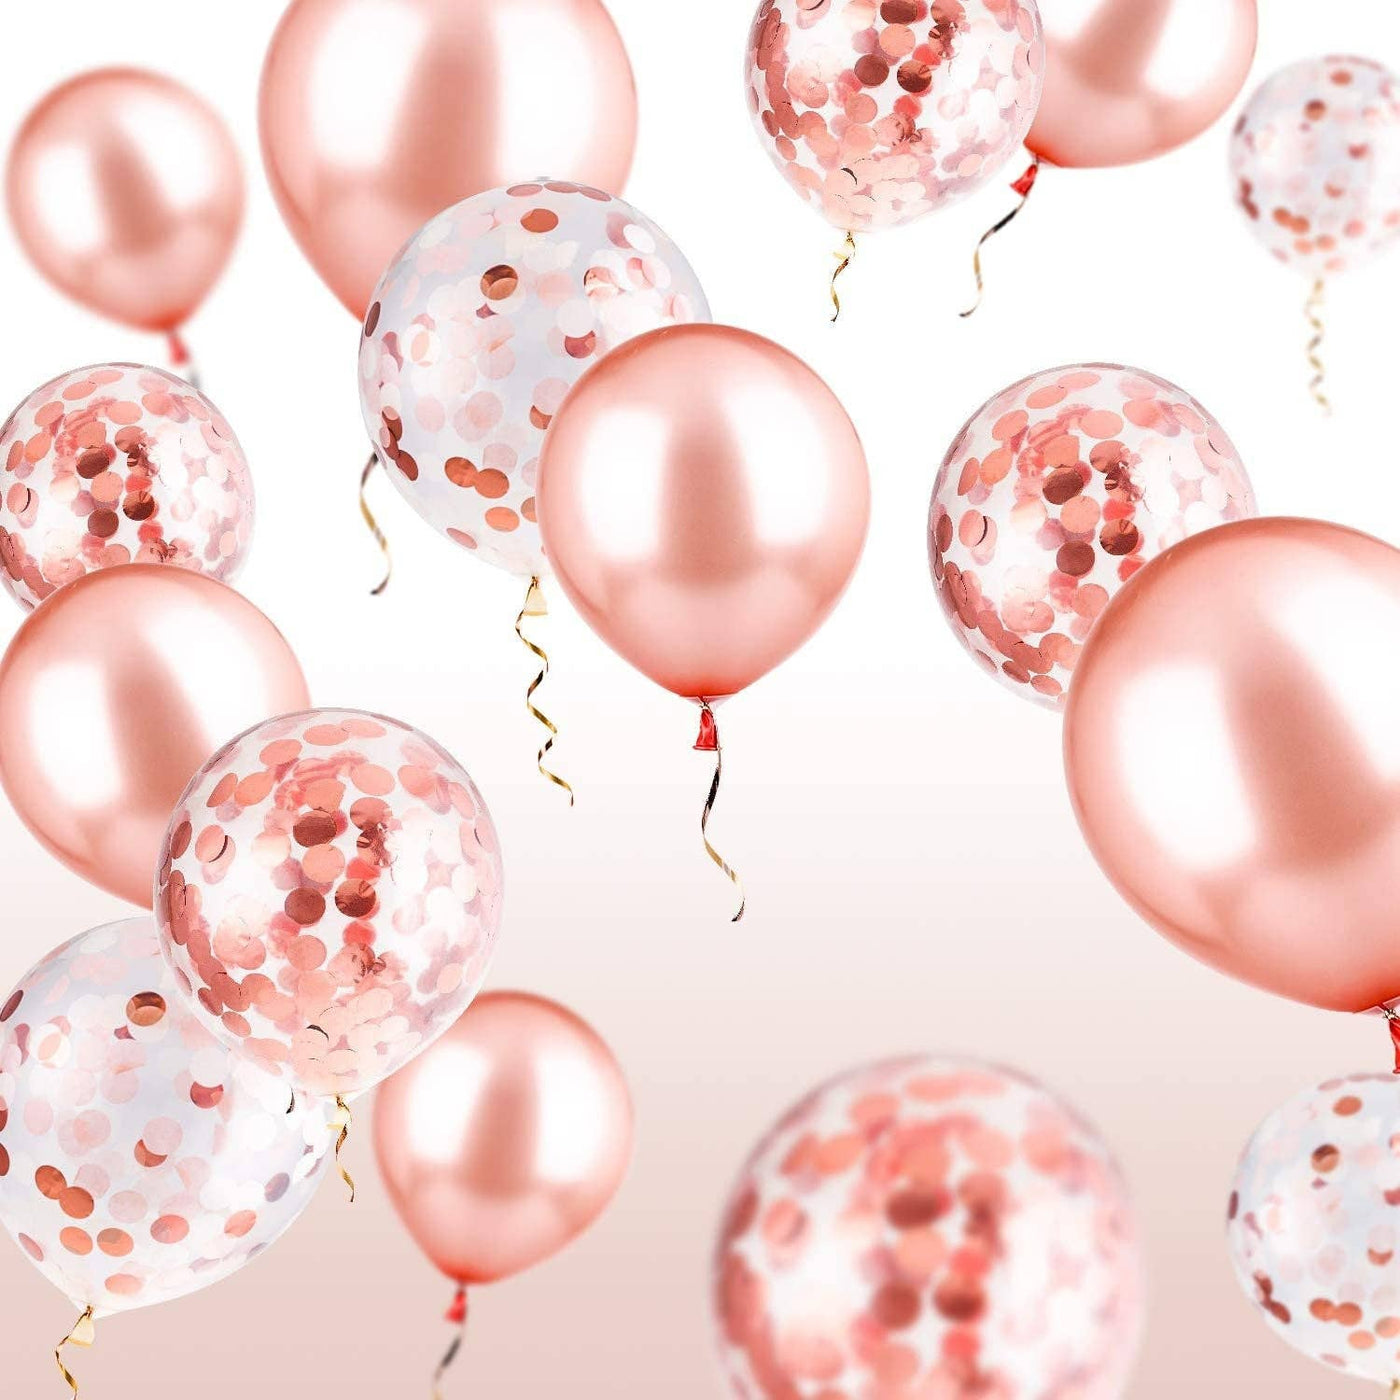 8 Rose Gold Confetti Balloon Bouquet with Helium